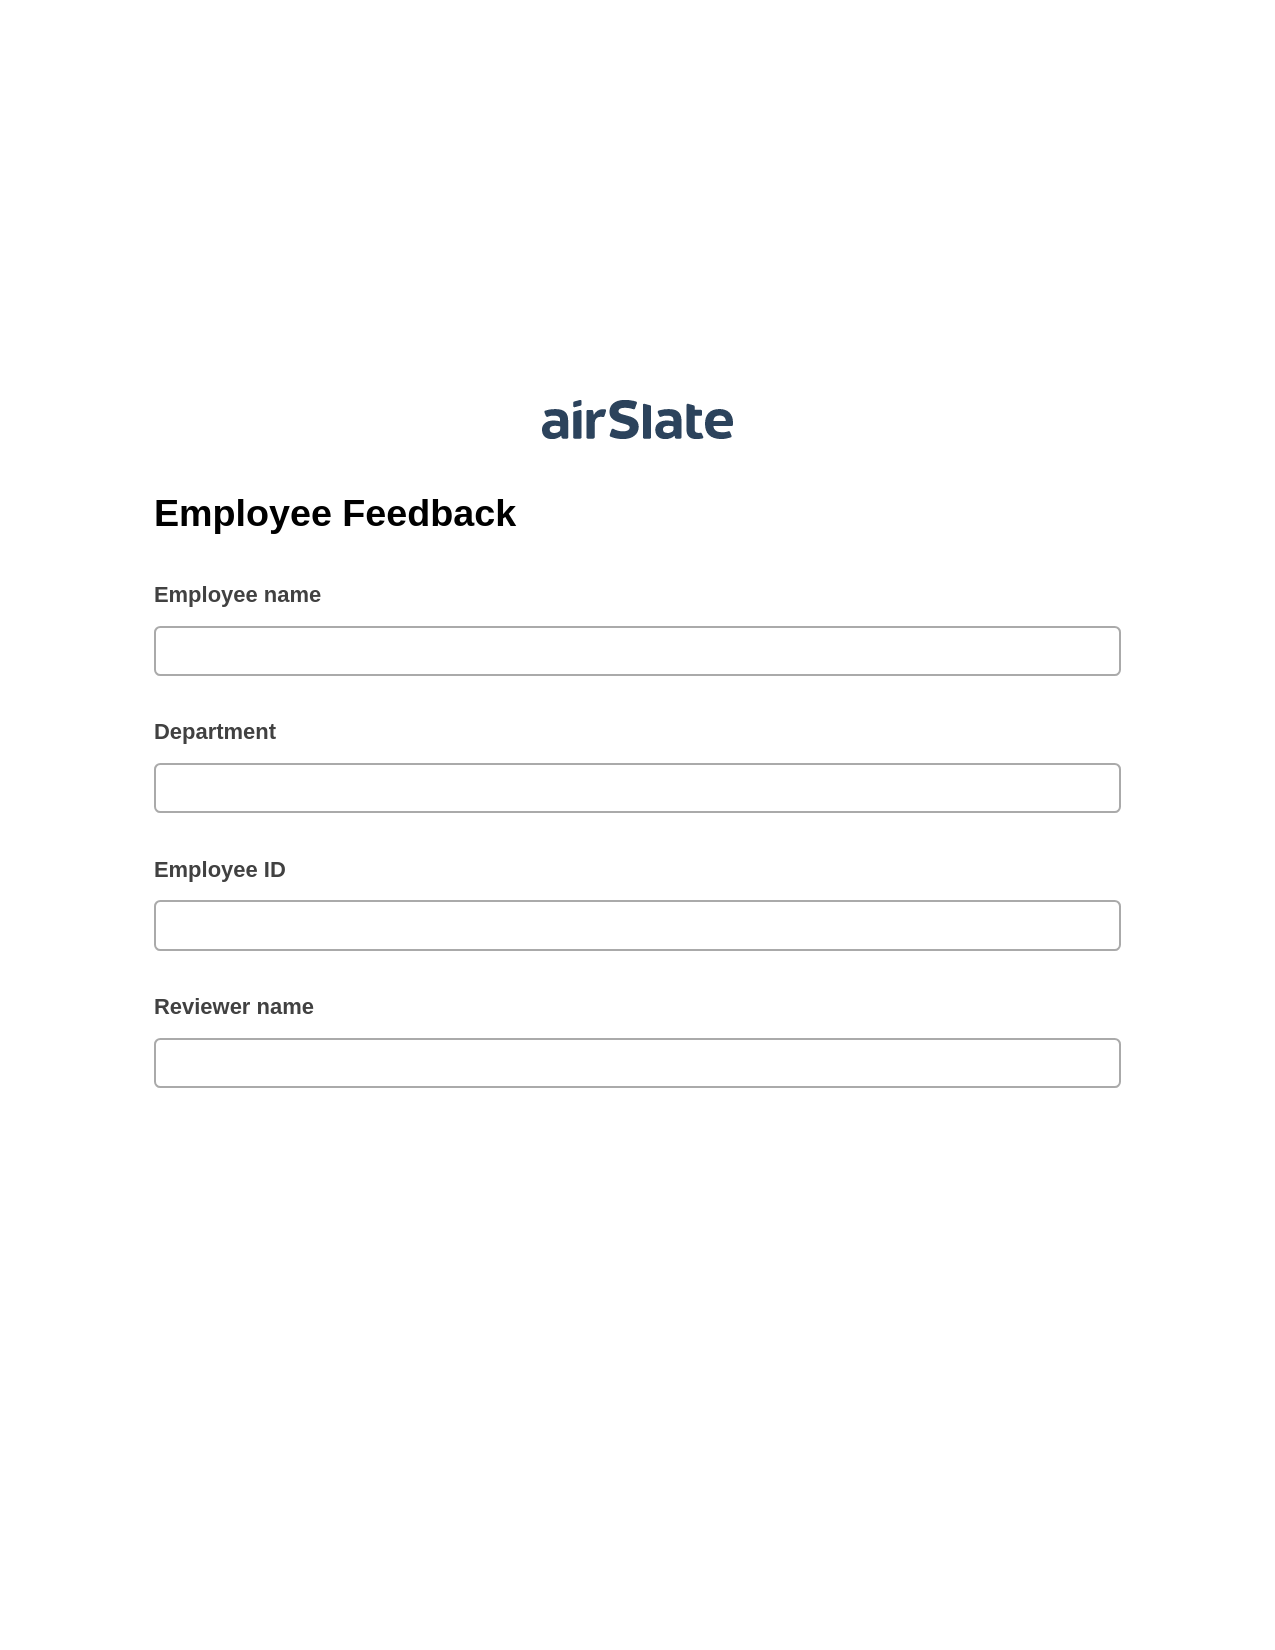 Employee Feedback Pre-fill from Salesforce Record Bot, Unassign Role Bot, Export to Formstack Documents Bot